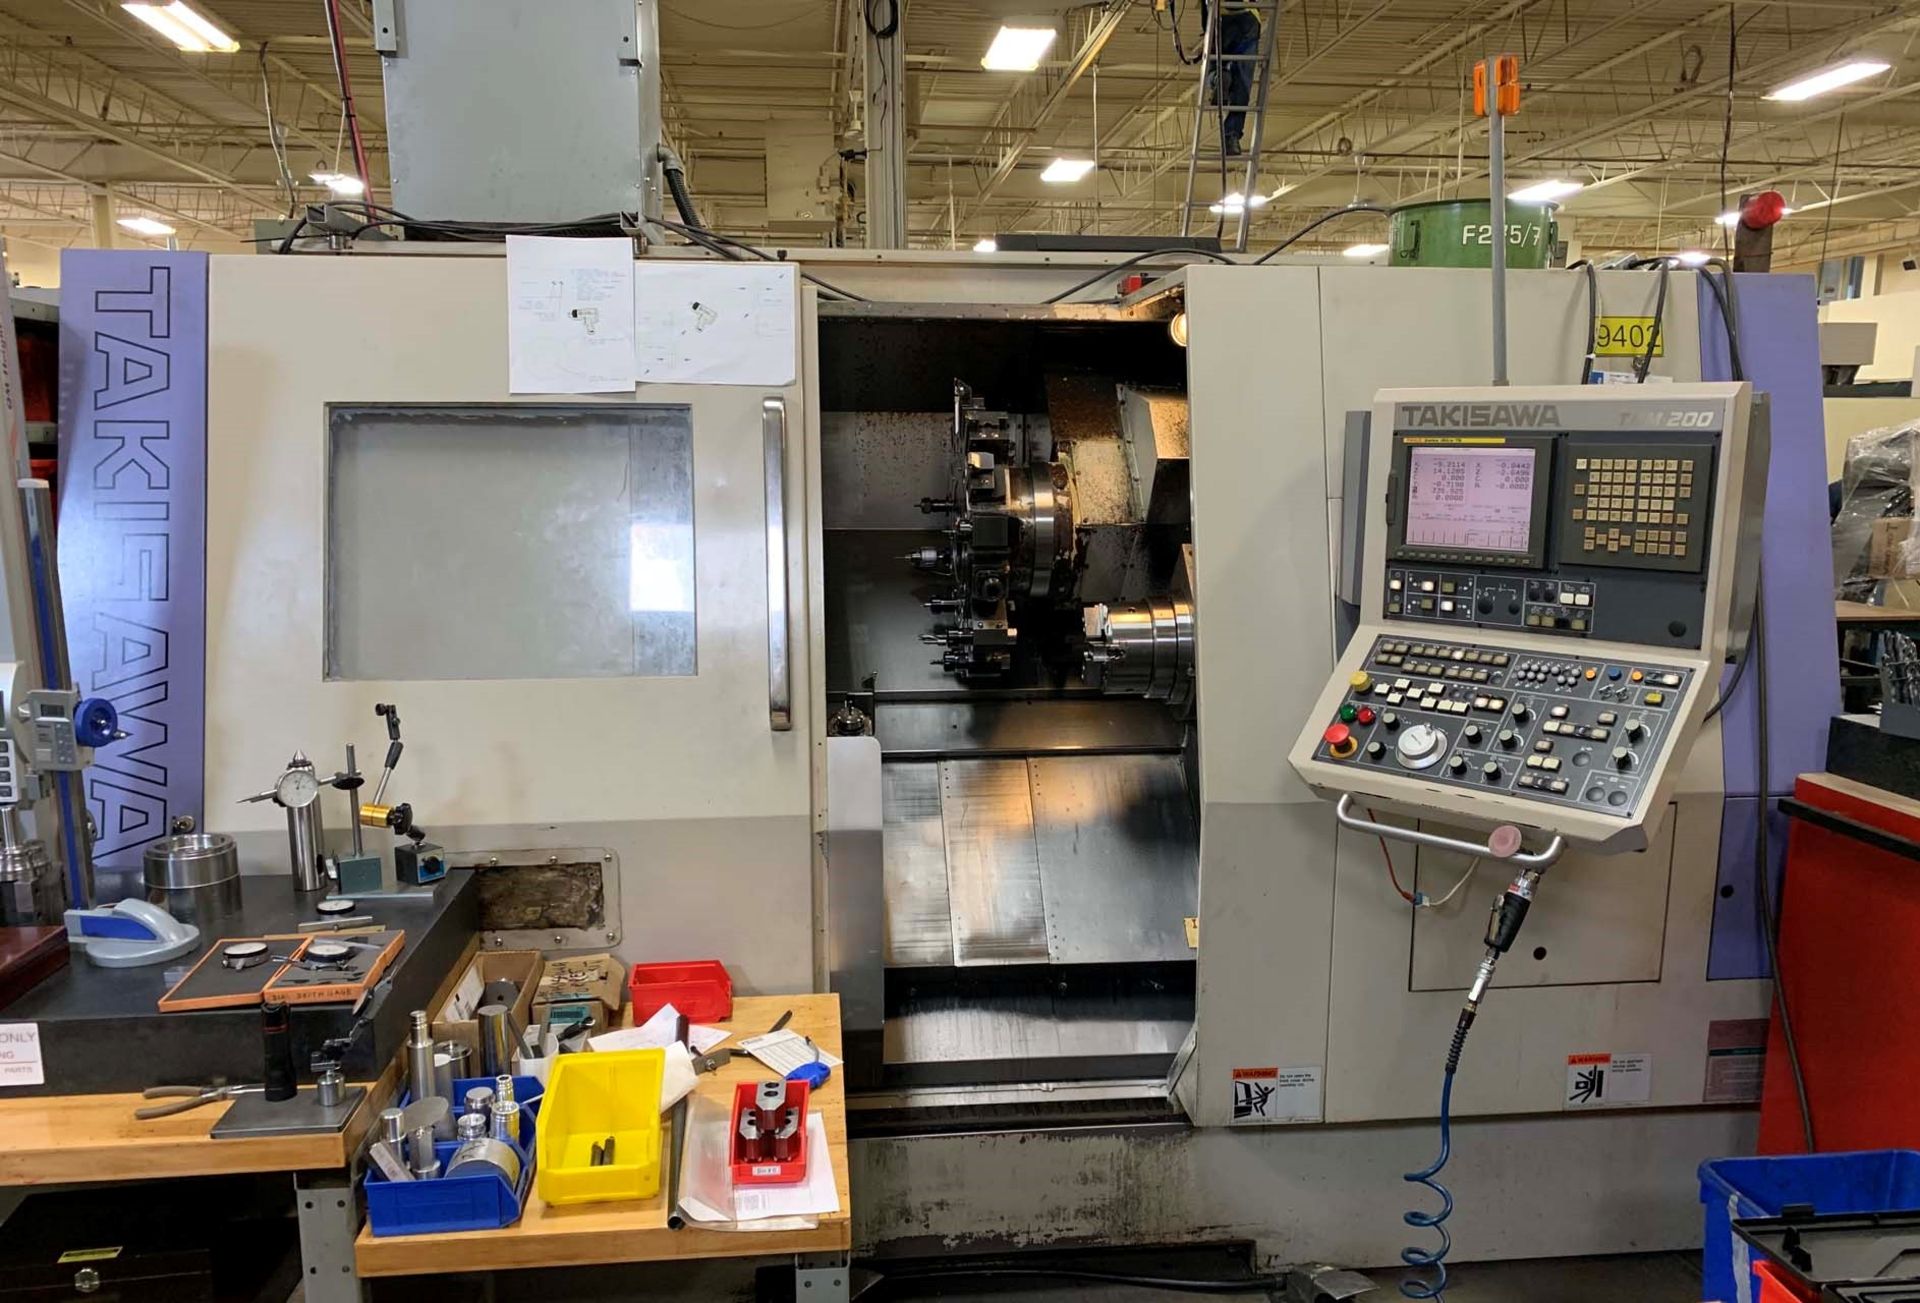 Takisawa TMM-200 Twin Spindle, Twin Turret, Y-Axis CNC Lathe, SN TBMY4004, New 2003